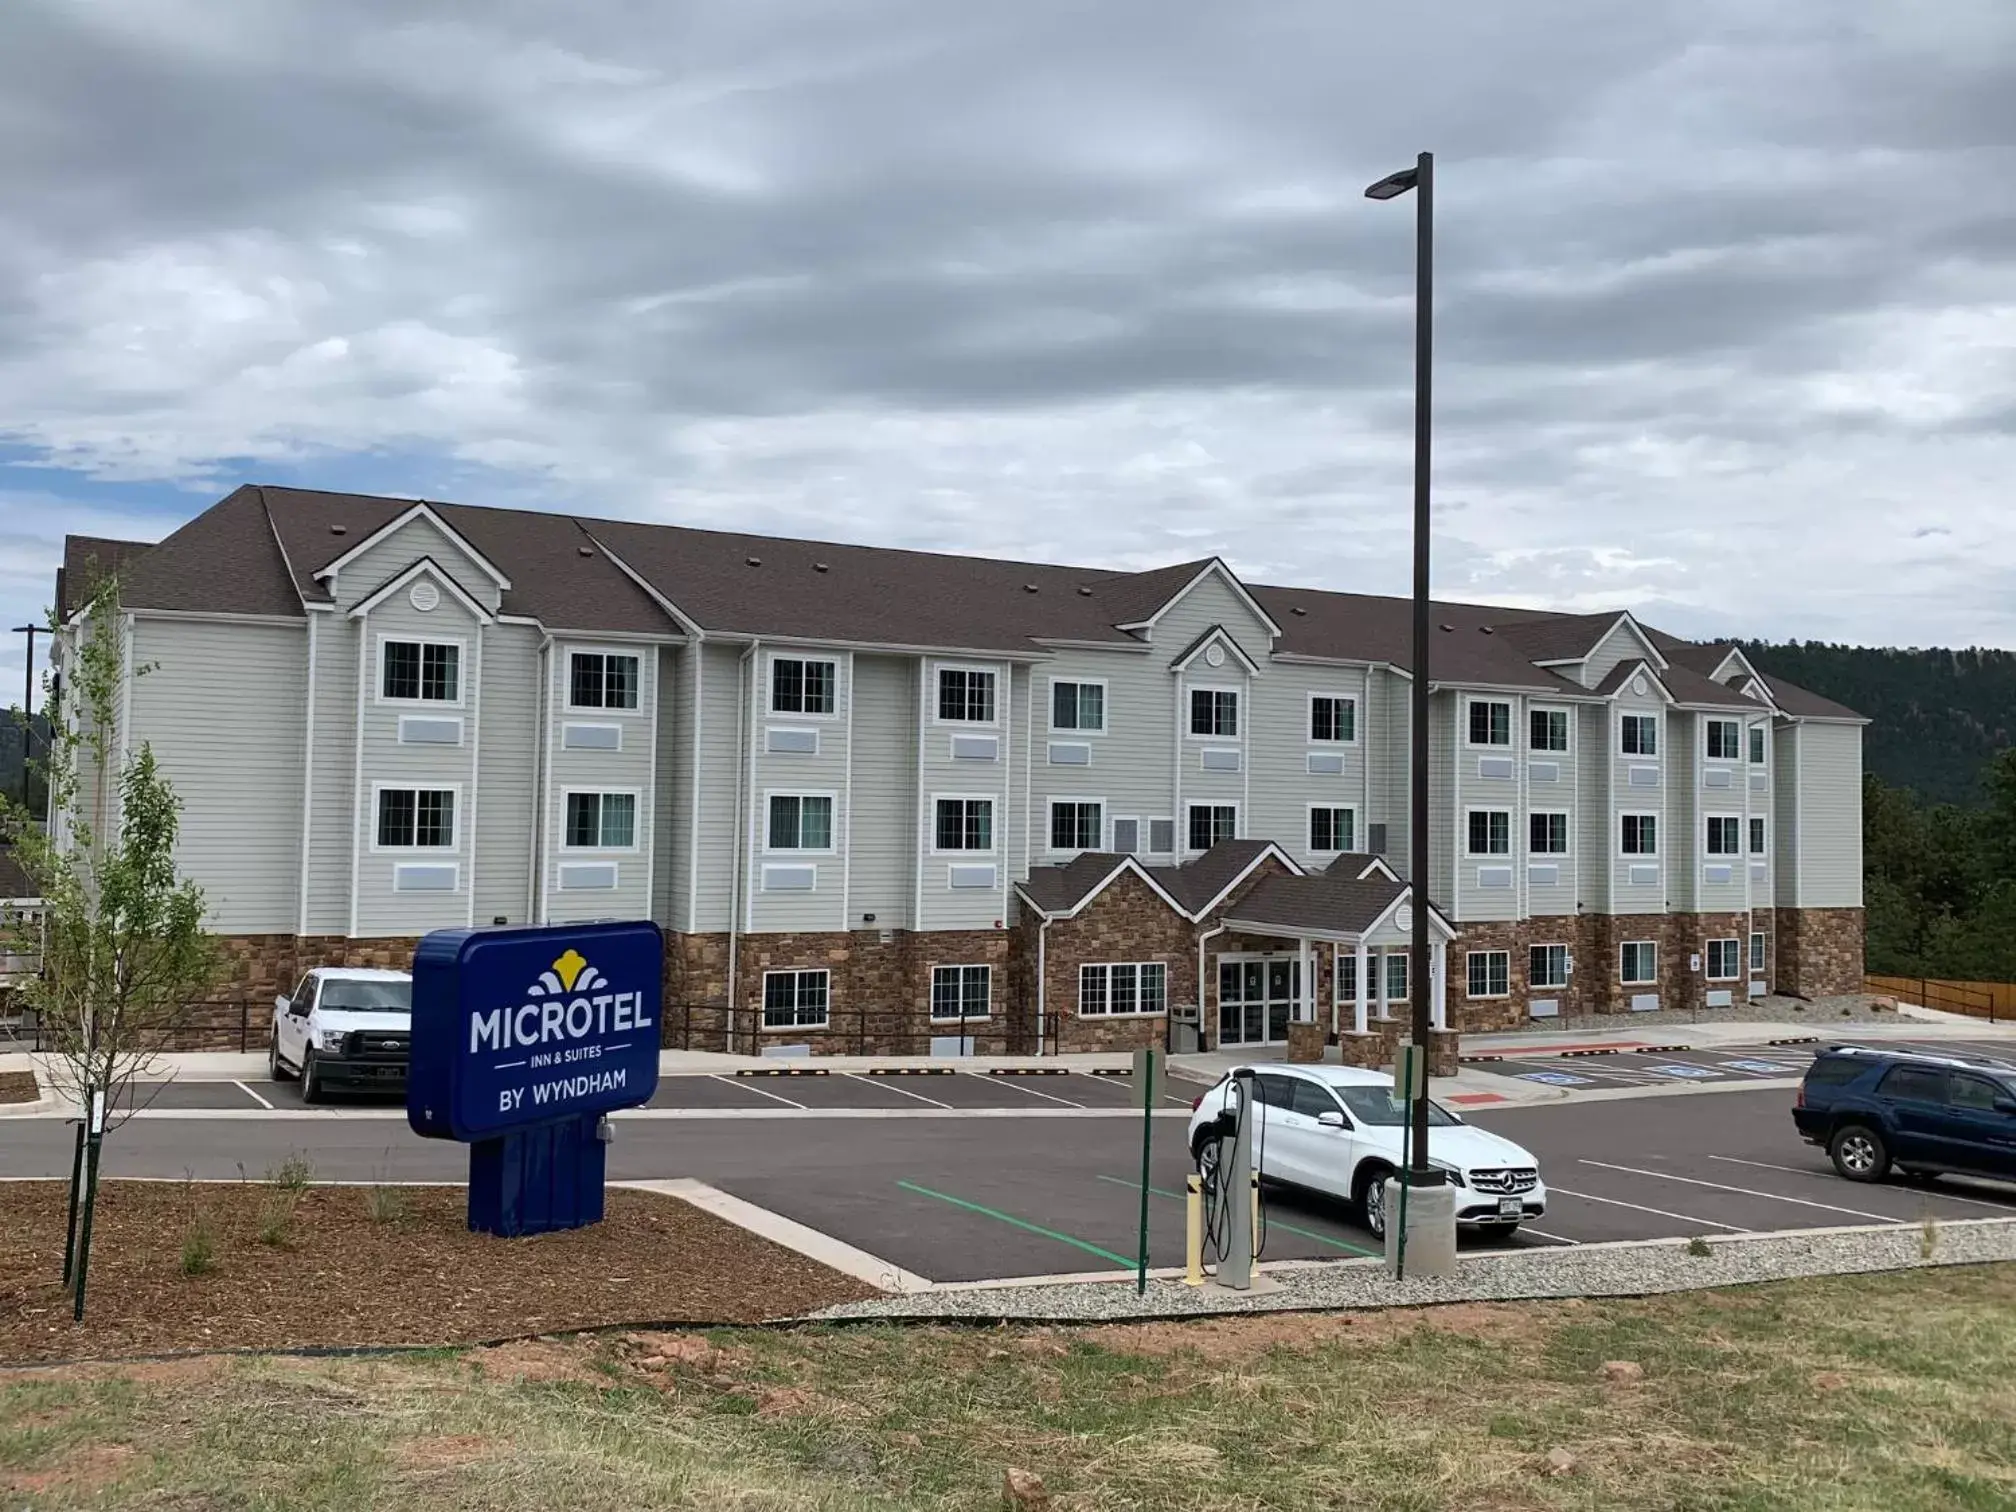 Property building in Microtel Inn & Suites by Wyndham Woodland Park